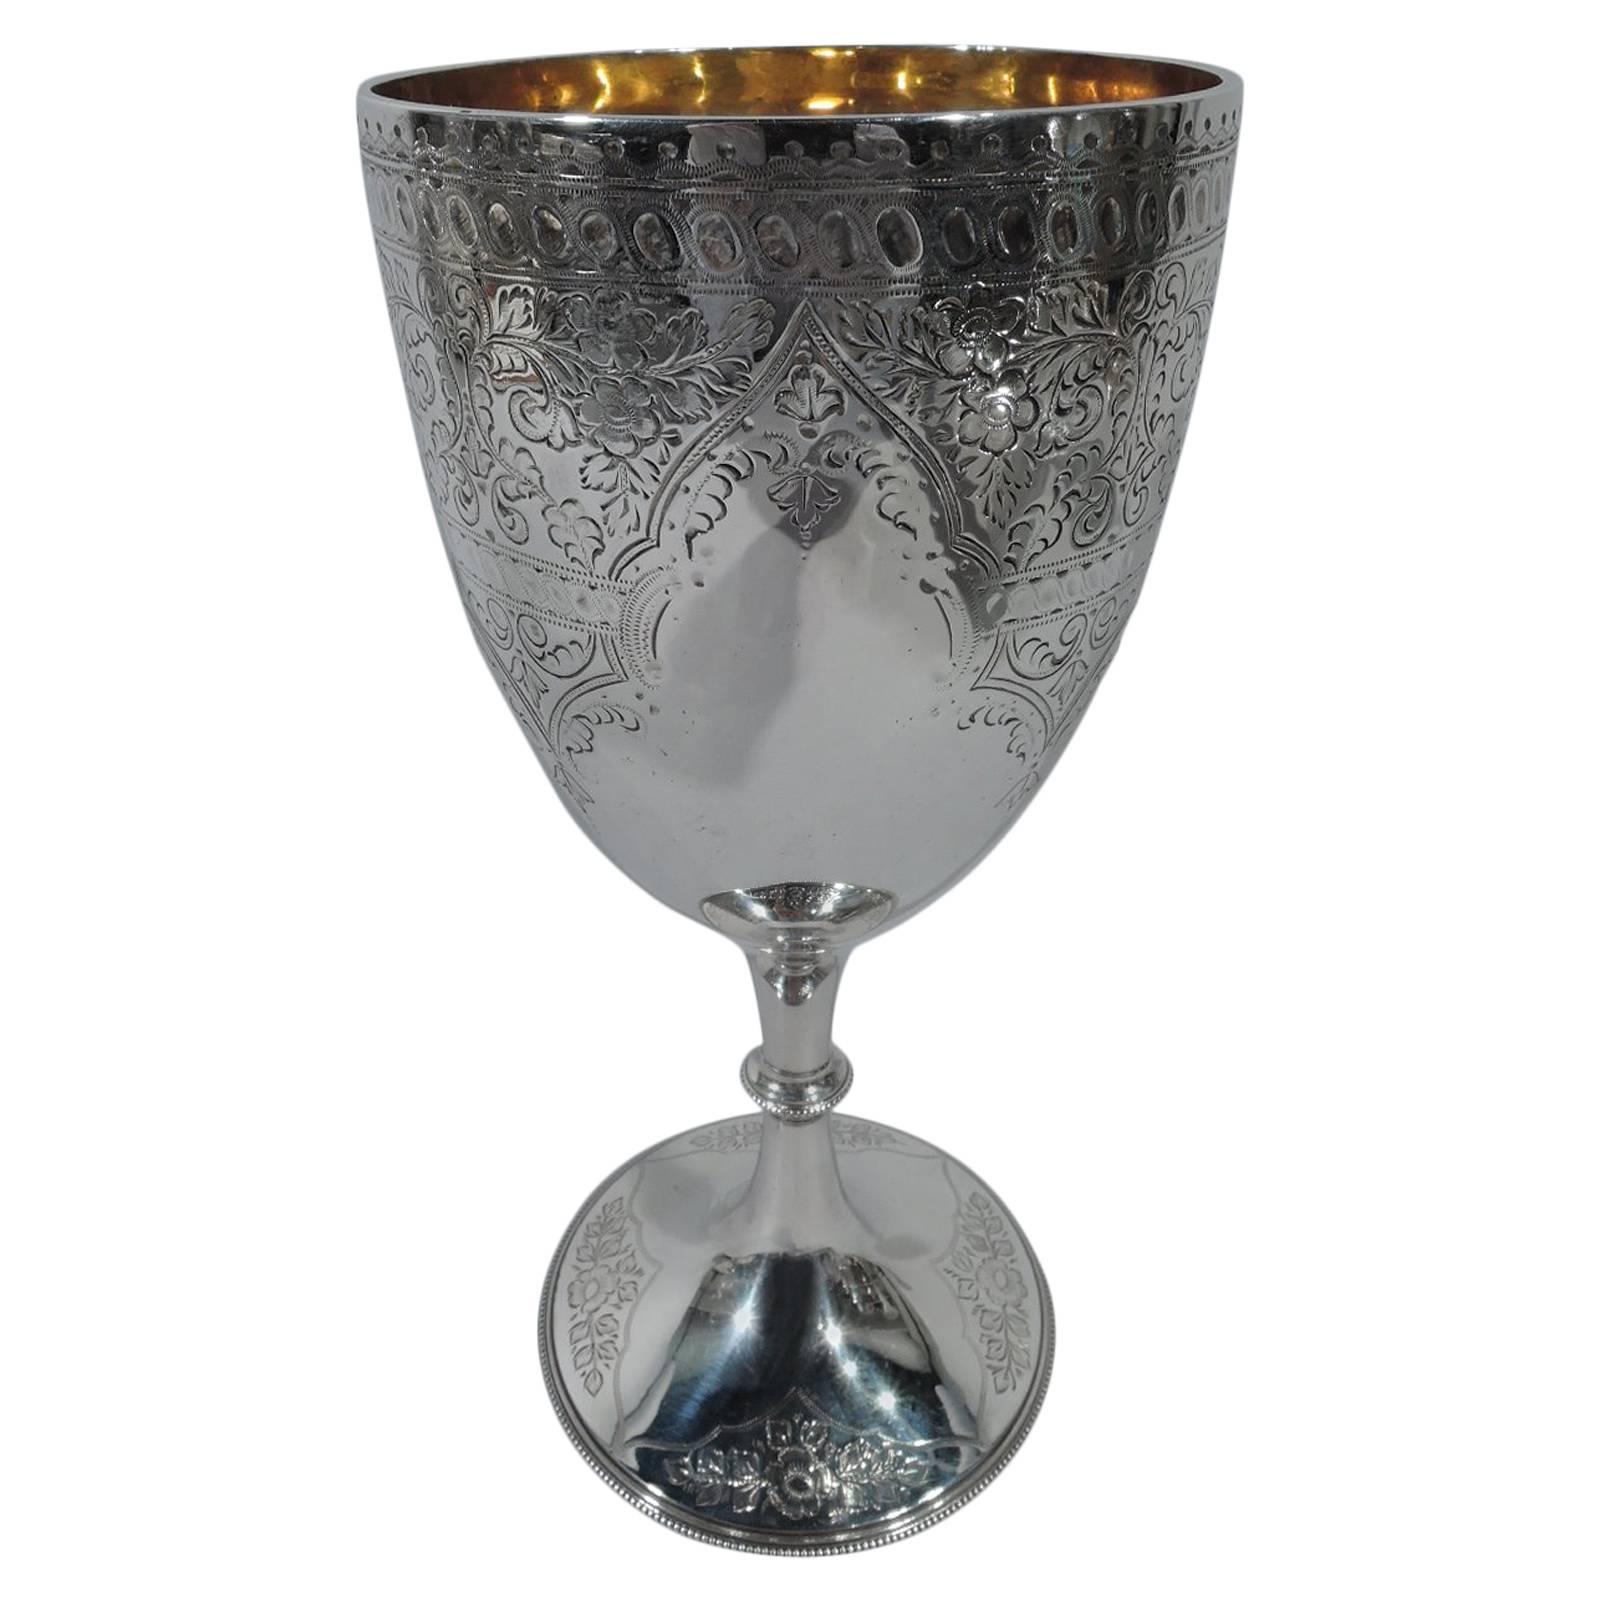 Antique English Aesthetic Sterling Silver Goblet